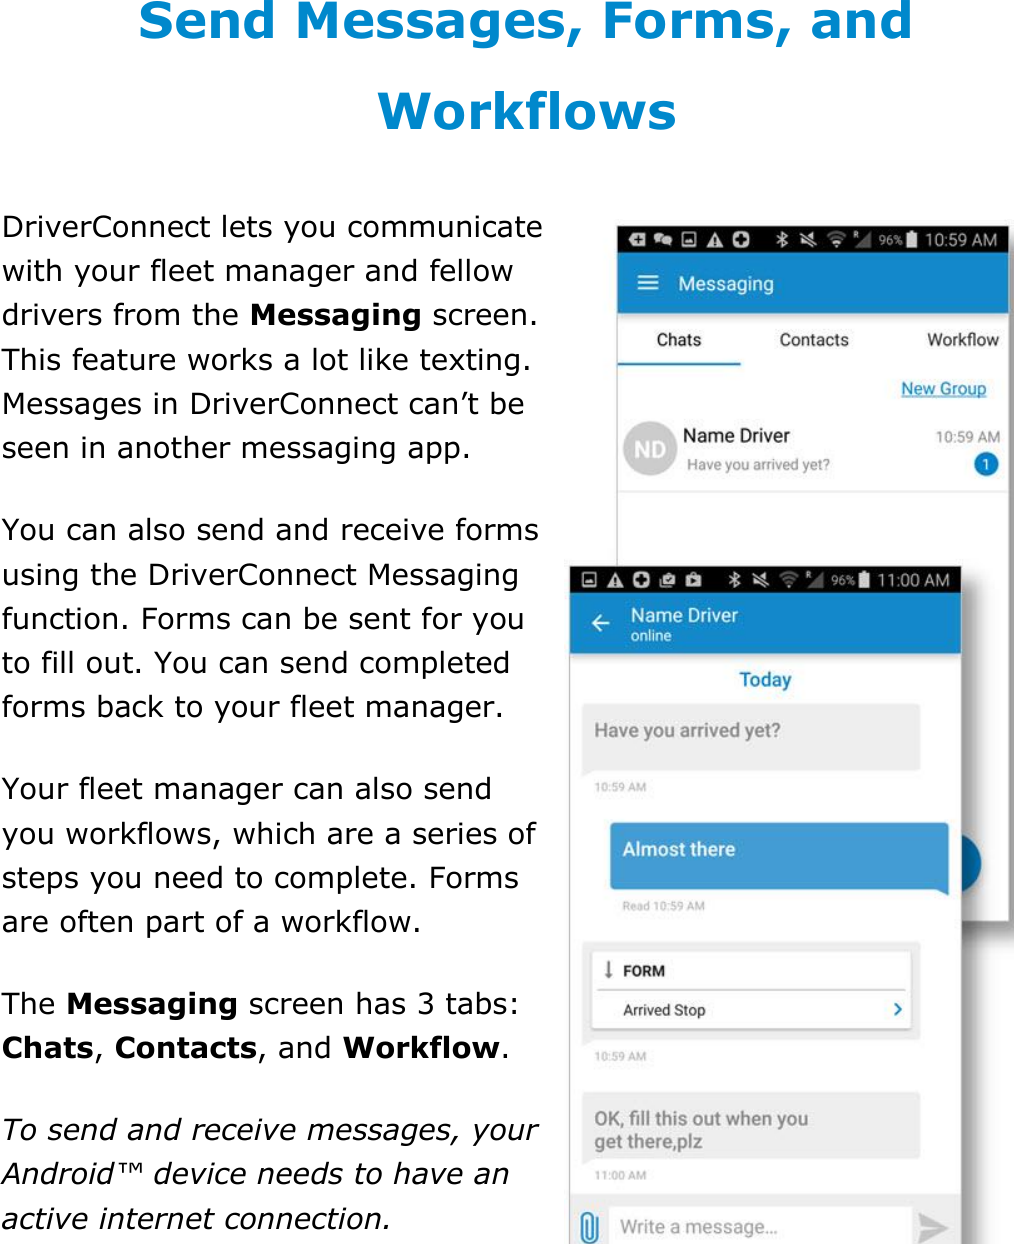 Send Messages, Forms, and Workflows DriverConnect User Guide  69 © 2017, Rand McNally, Inc. Send Messages, Forms, and Workflows DriverConnect lets you communicate with your fleet manager and fellow drivers from the Messaging screen. This feature works a lot like texting. Messages in DriverConnect can’t be seen in another messaging app. You can also send and receive forms using the DriverConnect Messaging function. Forms can be sent for you to fill out. You can send completed forms back to your fleet manager. Your fleet manager can also send you workflows, which are a series of steps you need to complete. Forms are often part of a workflow. The Messaging screen has 3 tabs: Chats, Contacts, and Workflow. To send and receive messages, your Android™ device needs to have an active internet connection.   